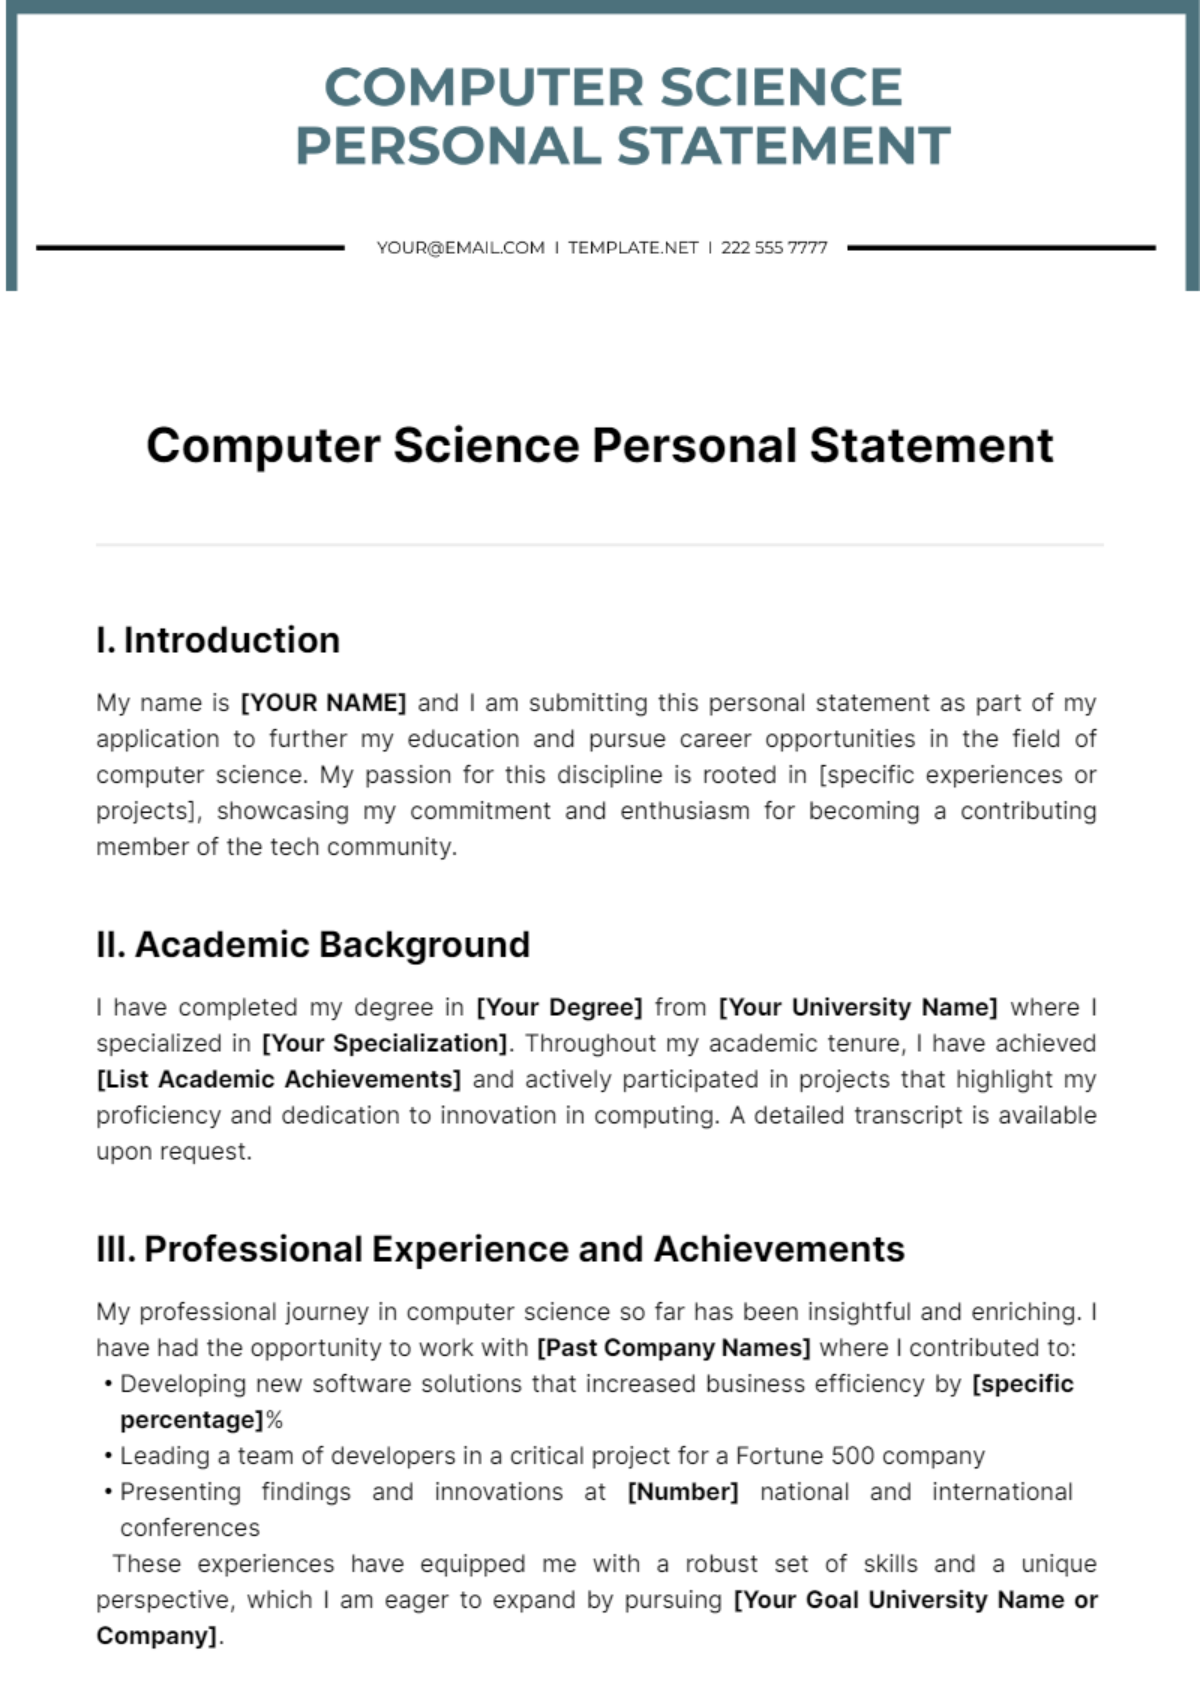 Computer Science Personal Statement Template